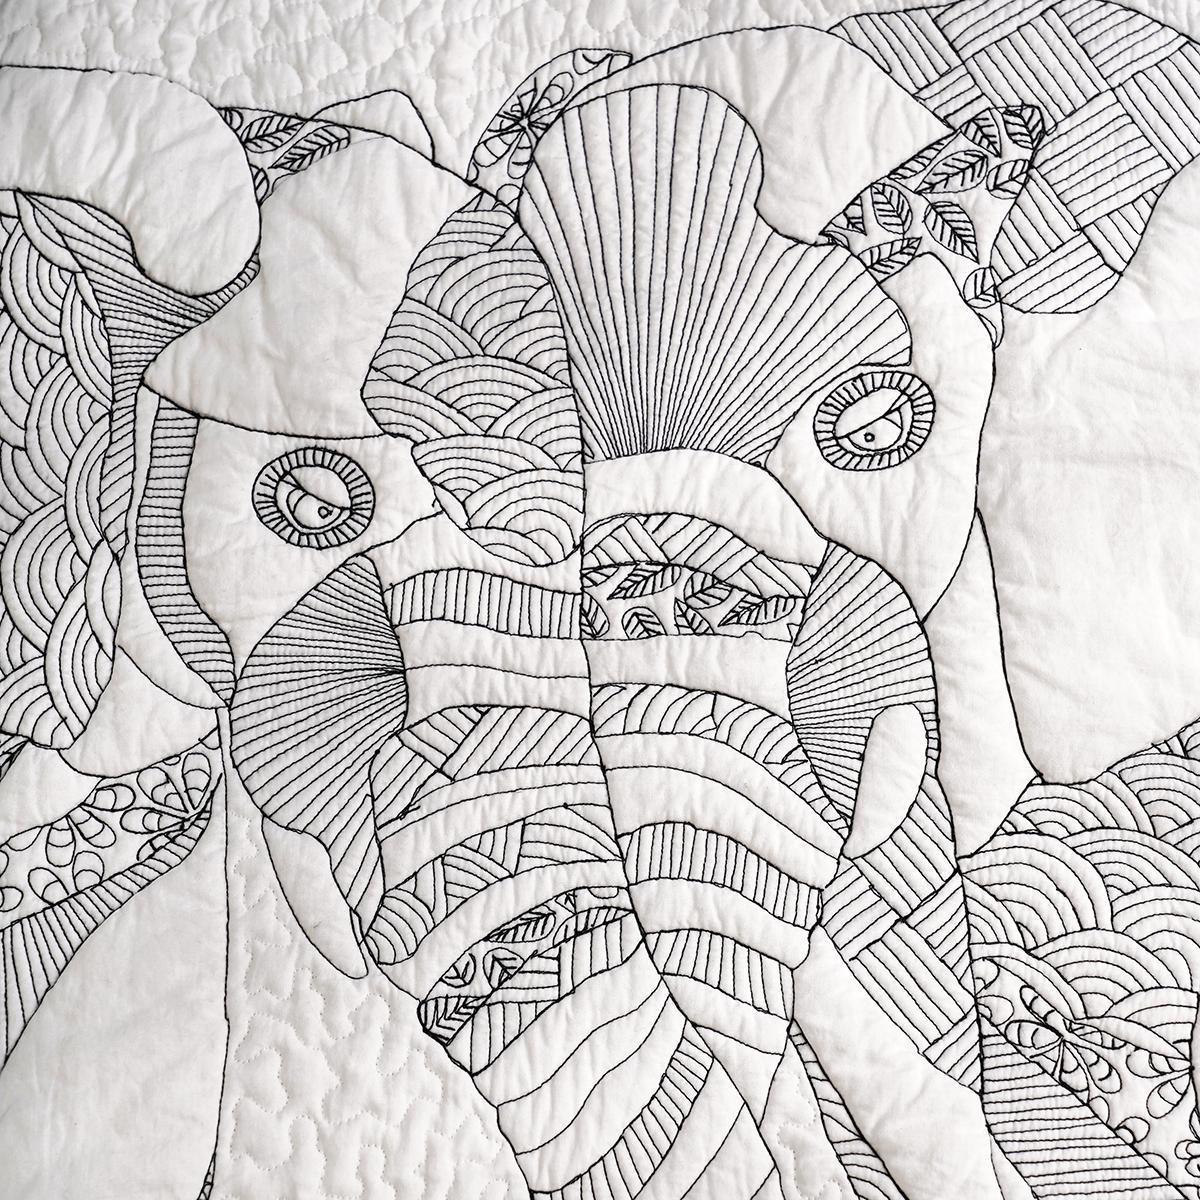 Quilted Textile WALL ART, Elephant doodle pattern, black and white, 18X30 inches